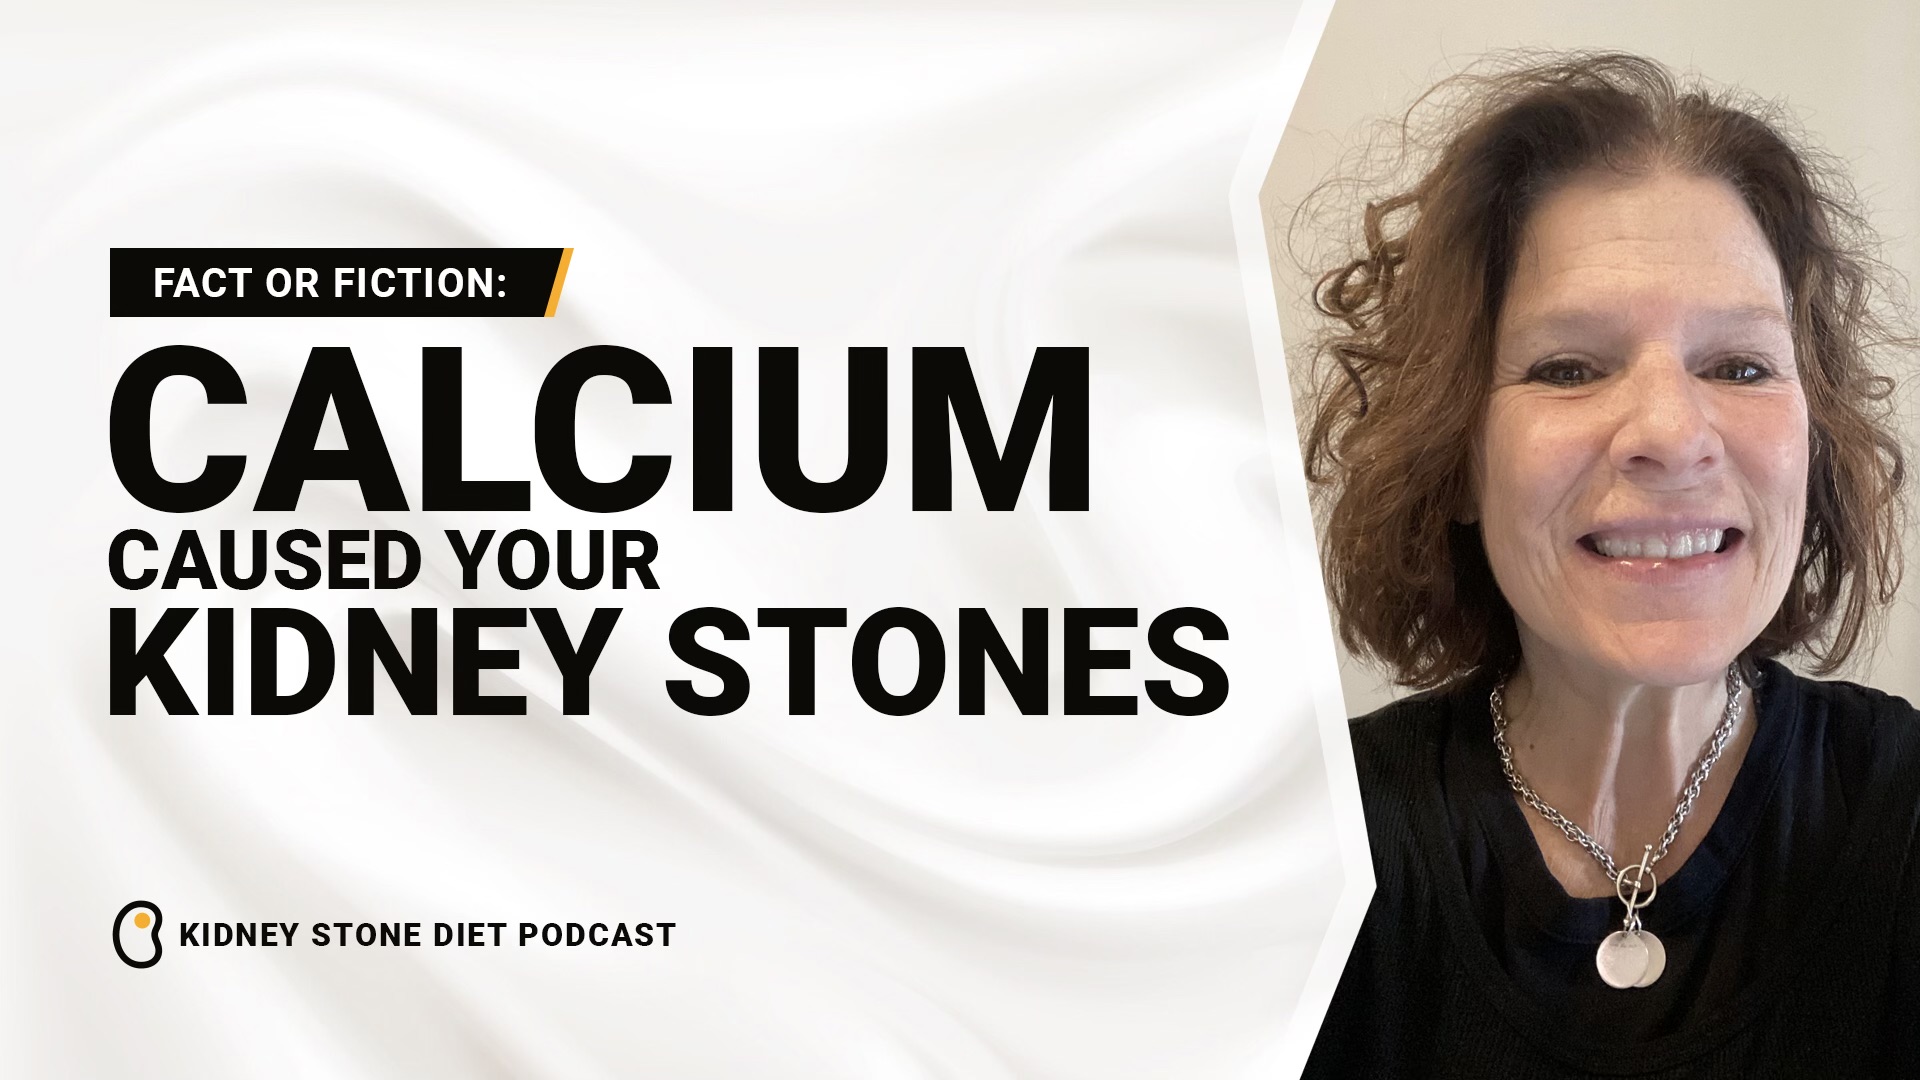 Fact or Fiction: Calcium caused your kidney stones